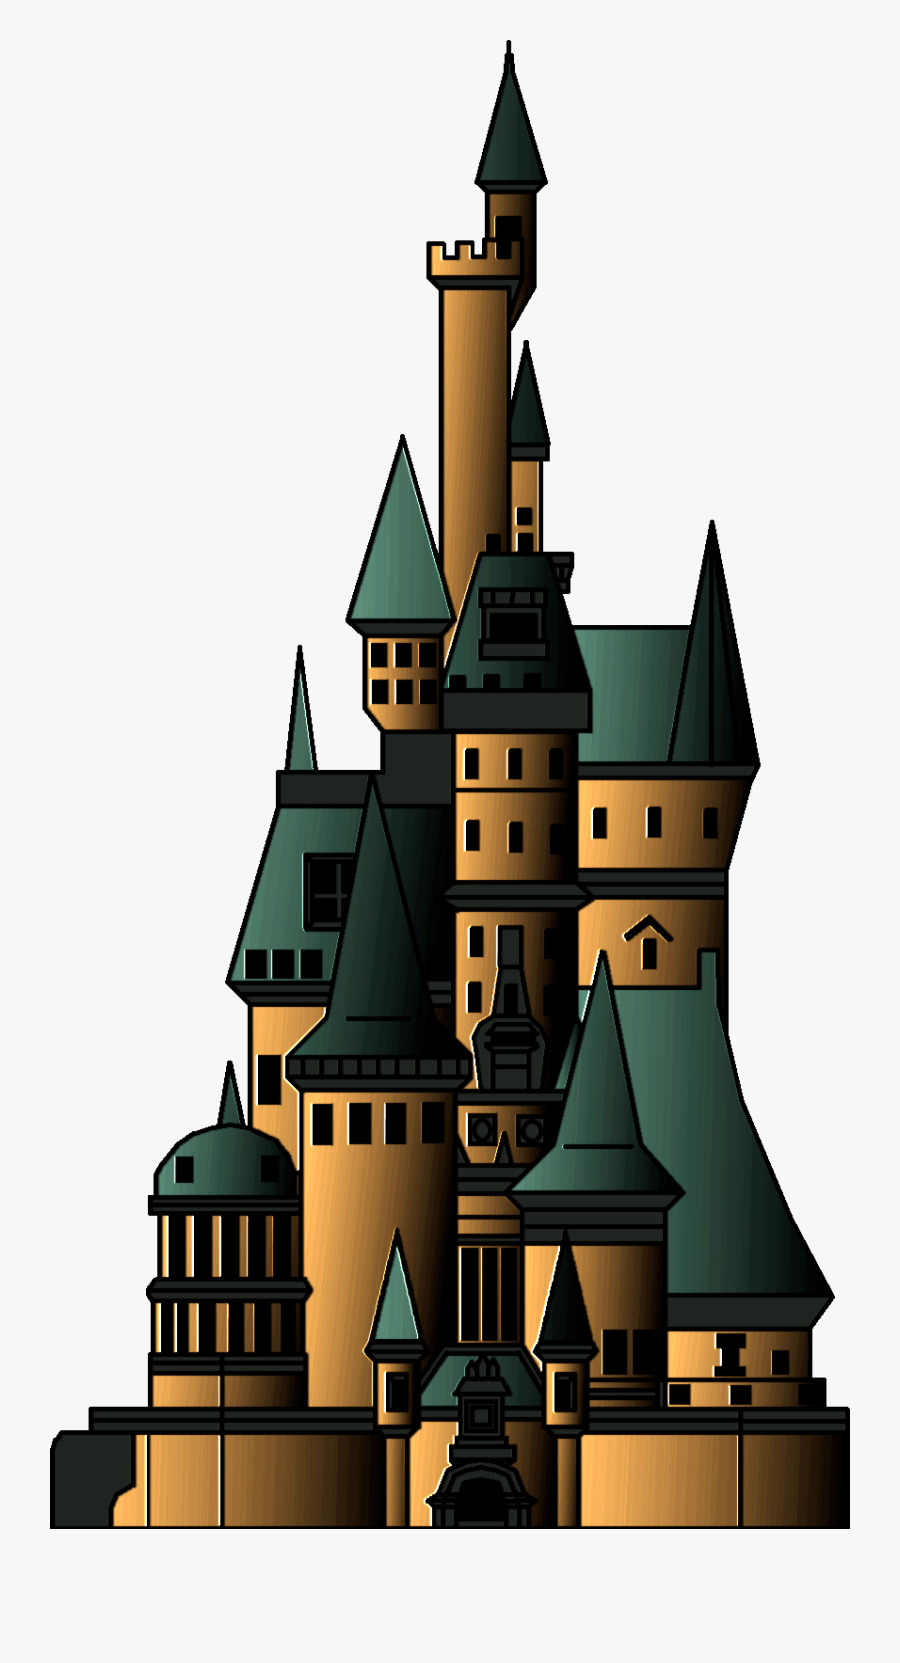 Beauty And The Beast Castle Png, Transparent Clipart